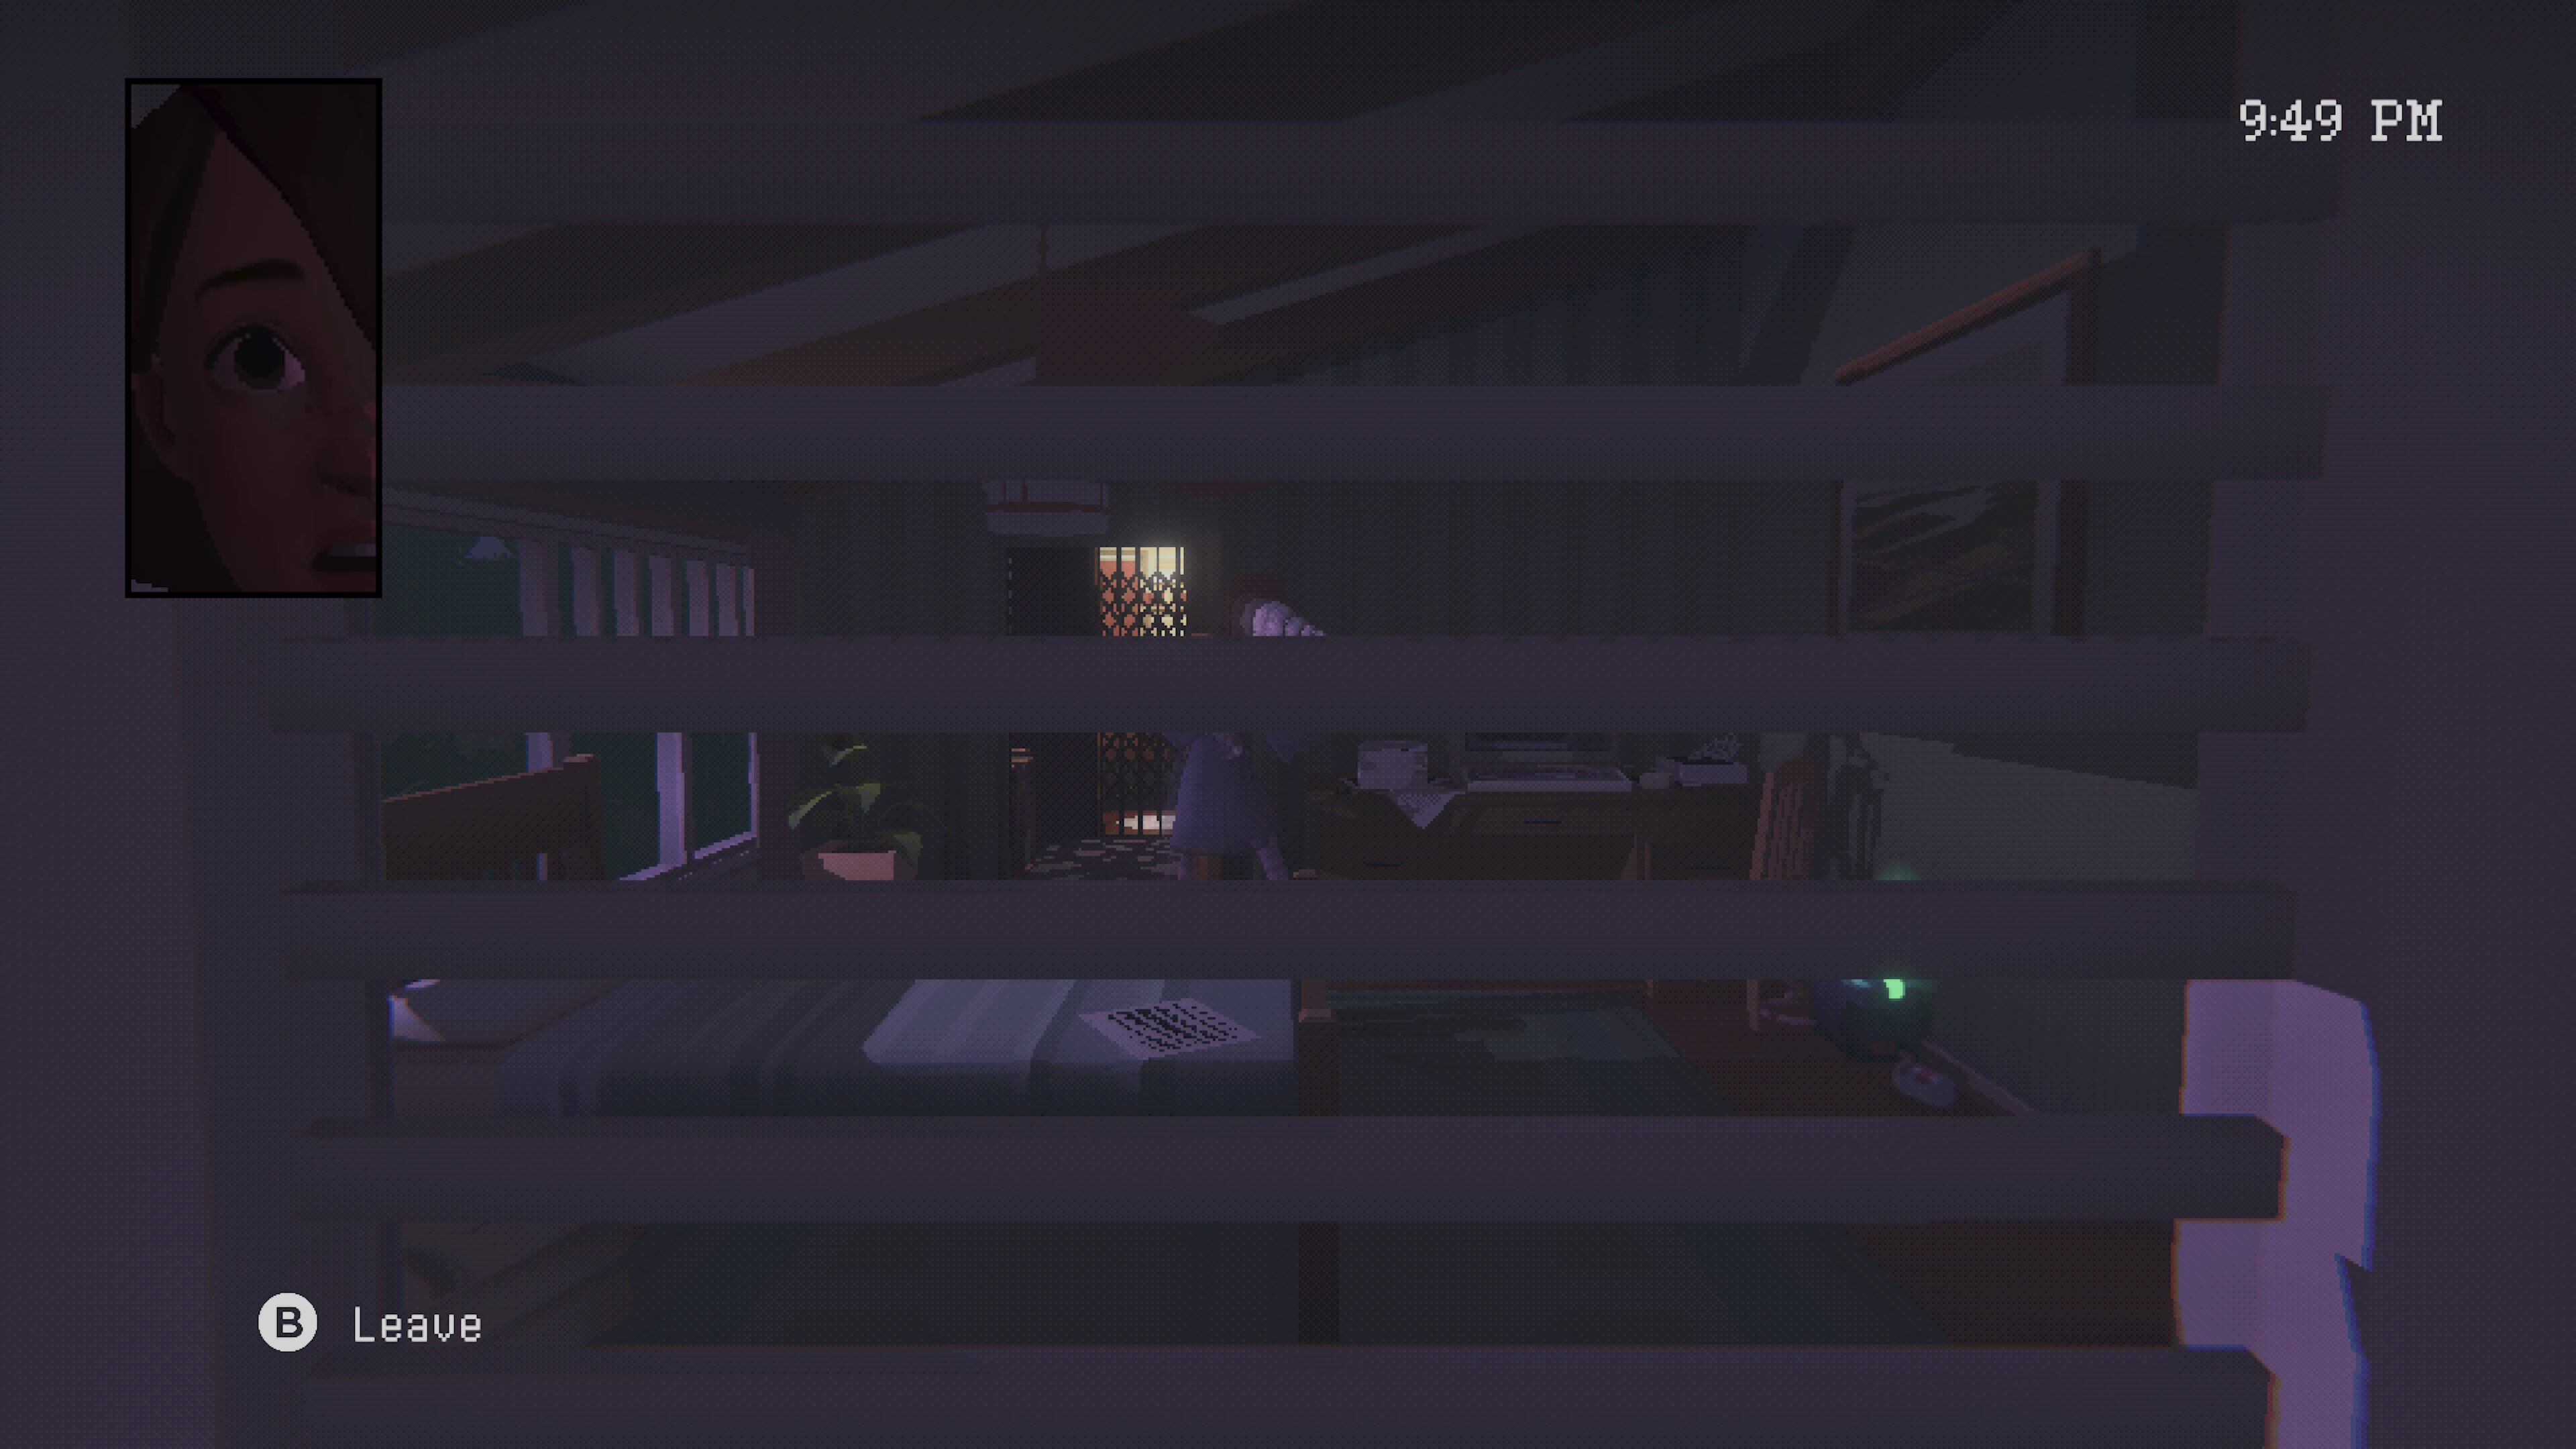 In Homebody, the player hides in a closet from a killer that's stalking them.